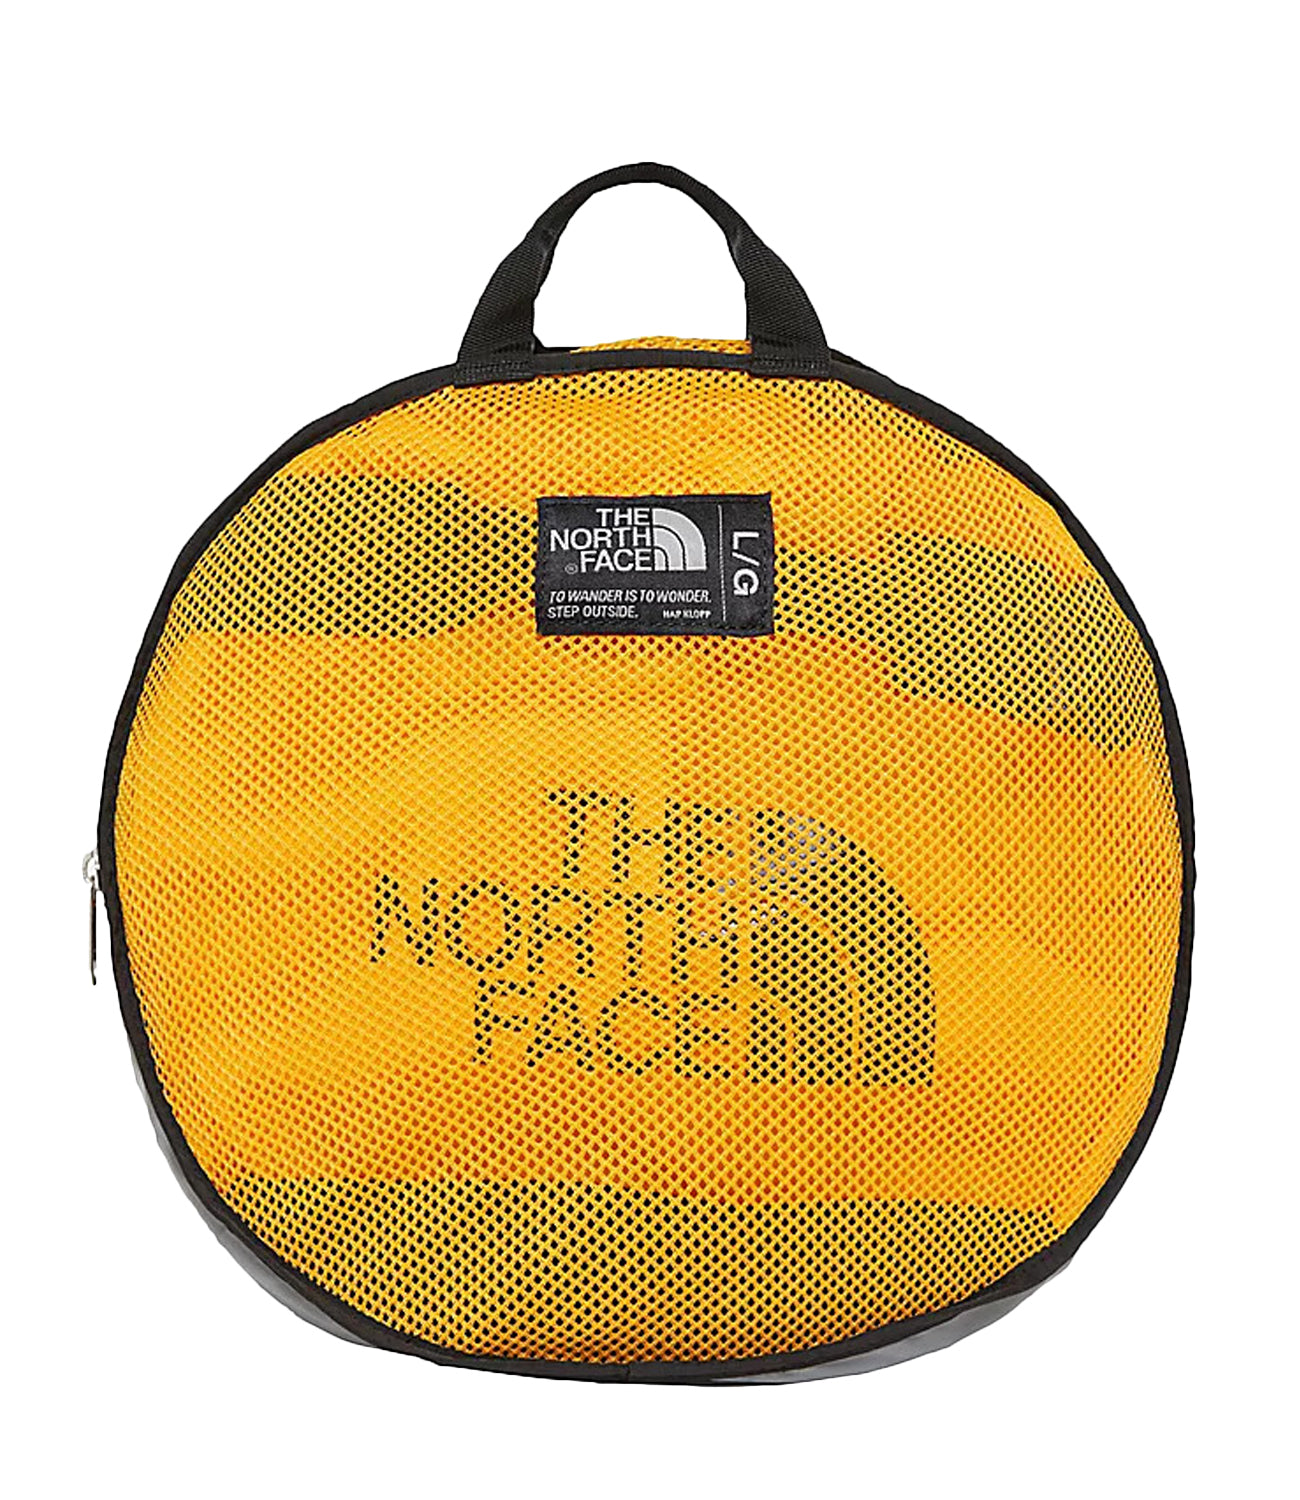 The North Face | Yellow and Black Travel Bag